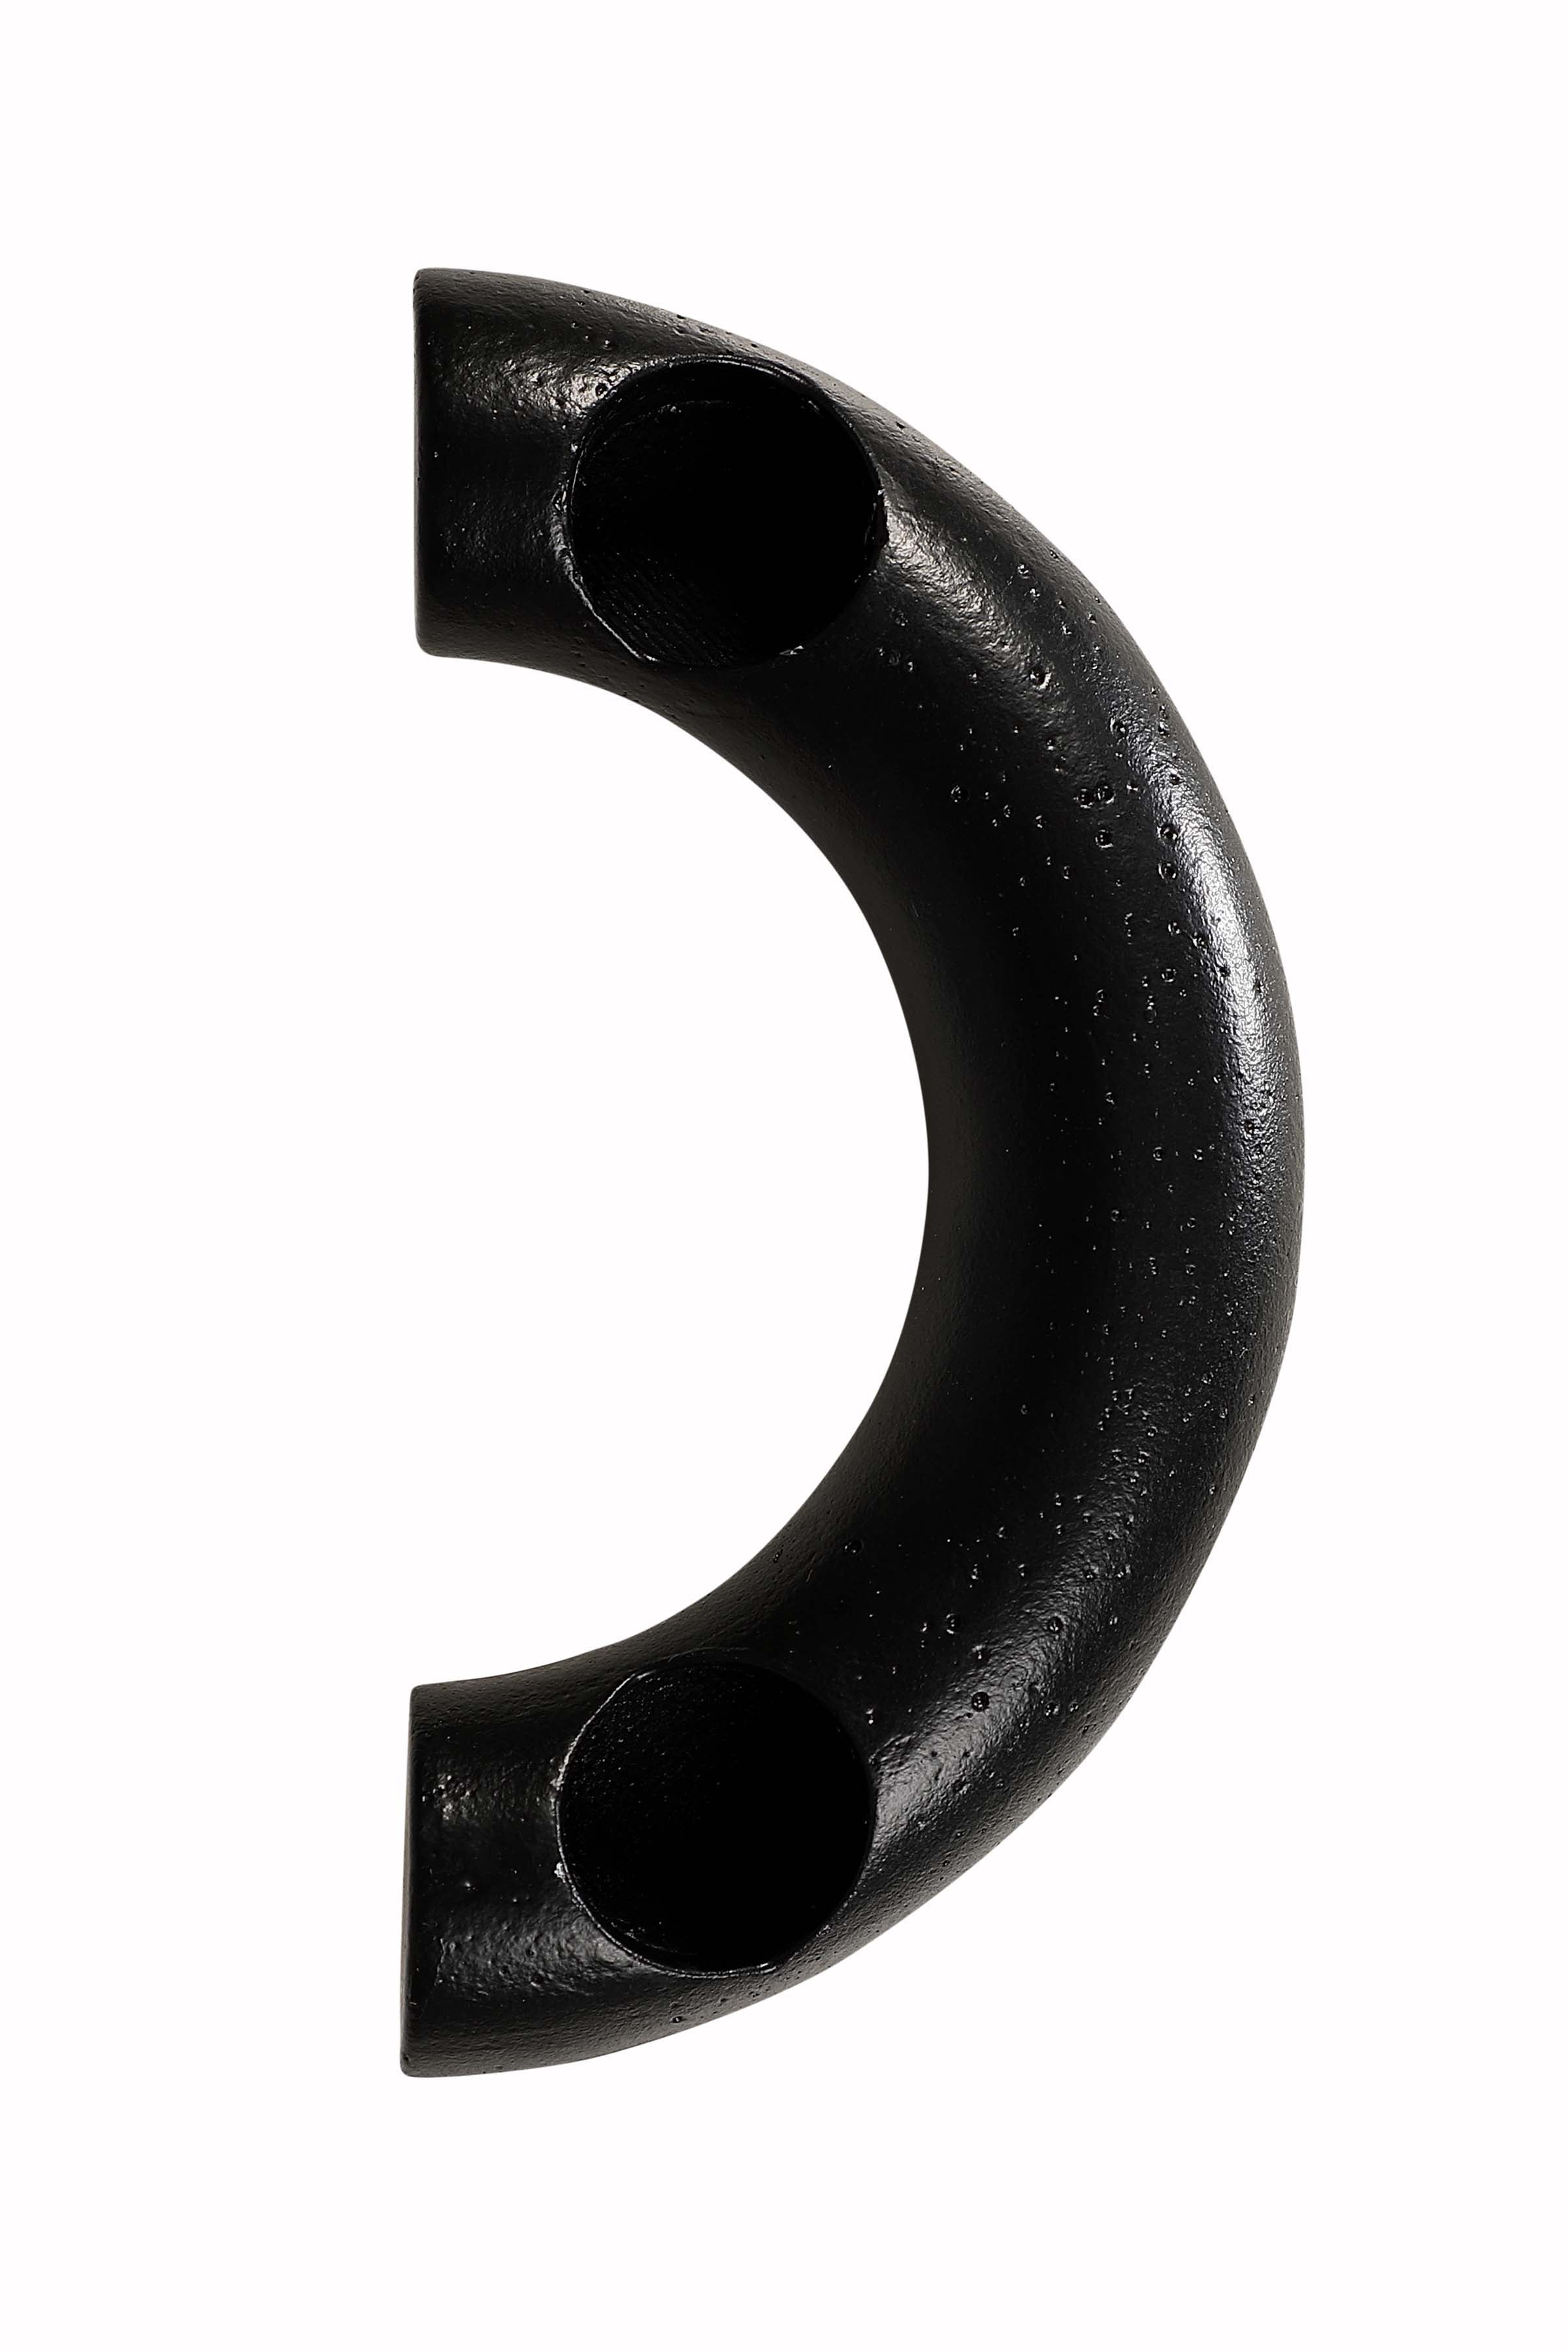 Nordic Style C Shaped Concrete Candle holder-  Black 5.5x3 Inch (Set of 2)